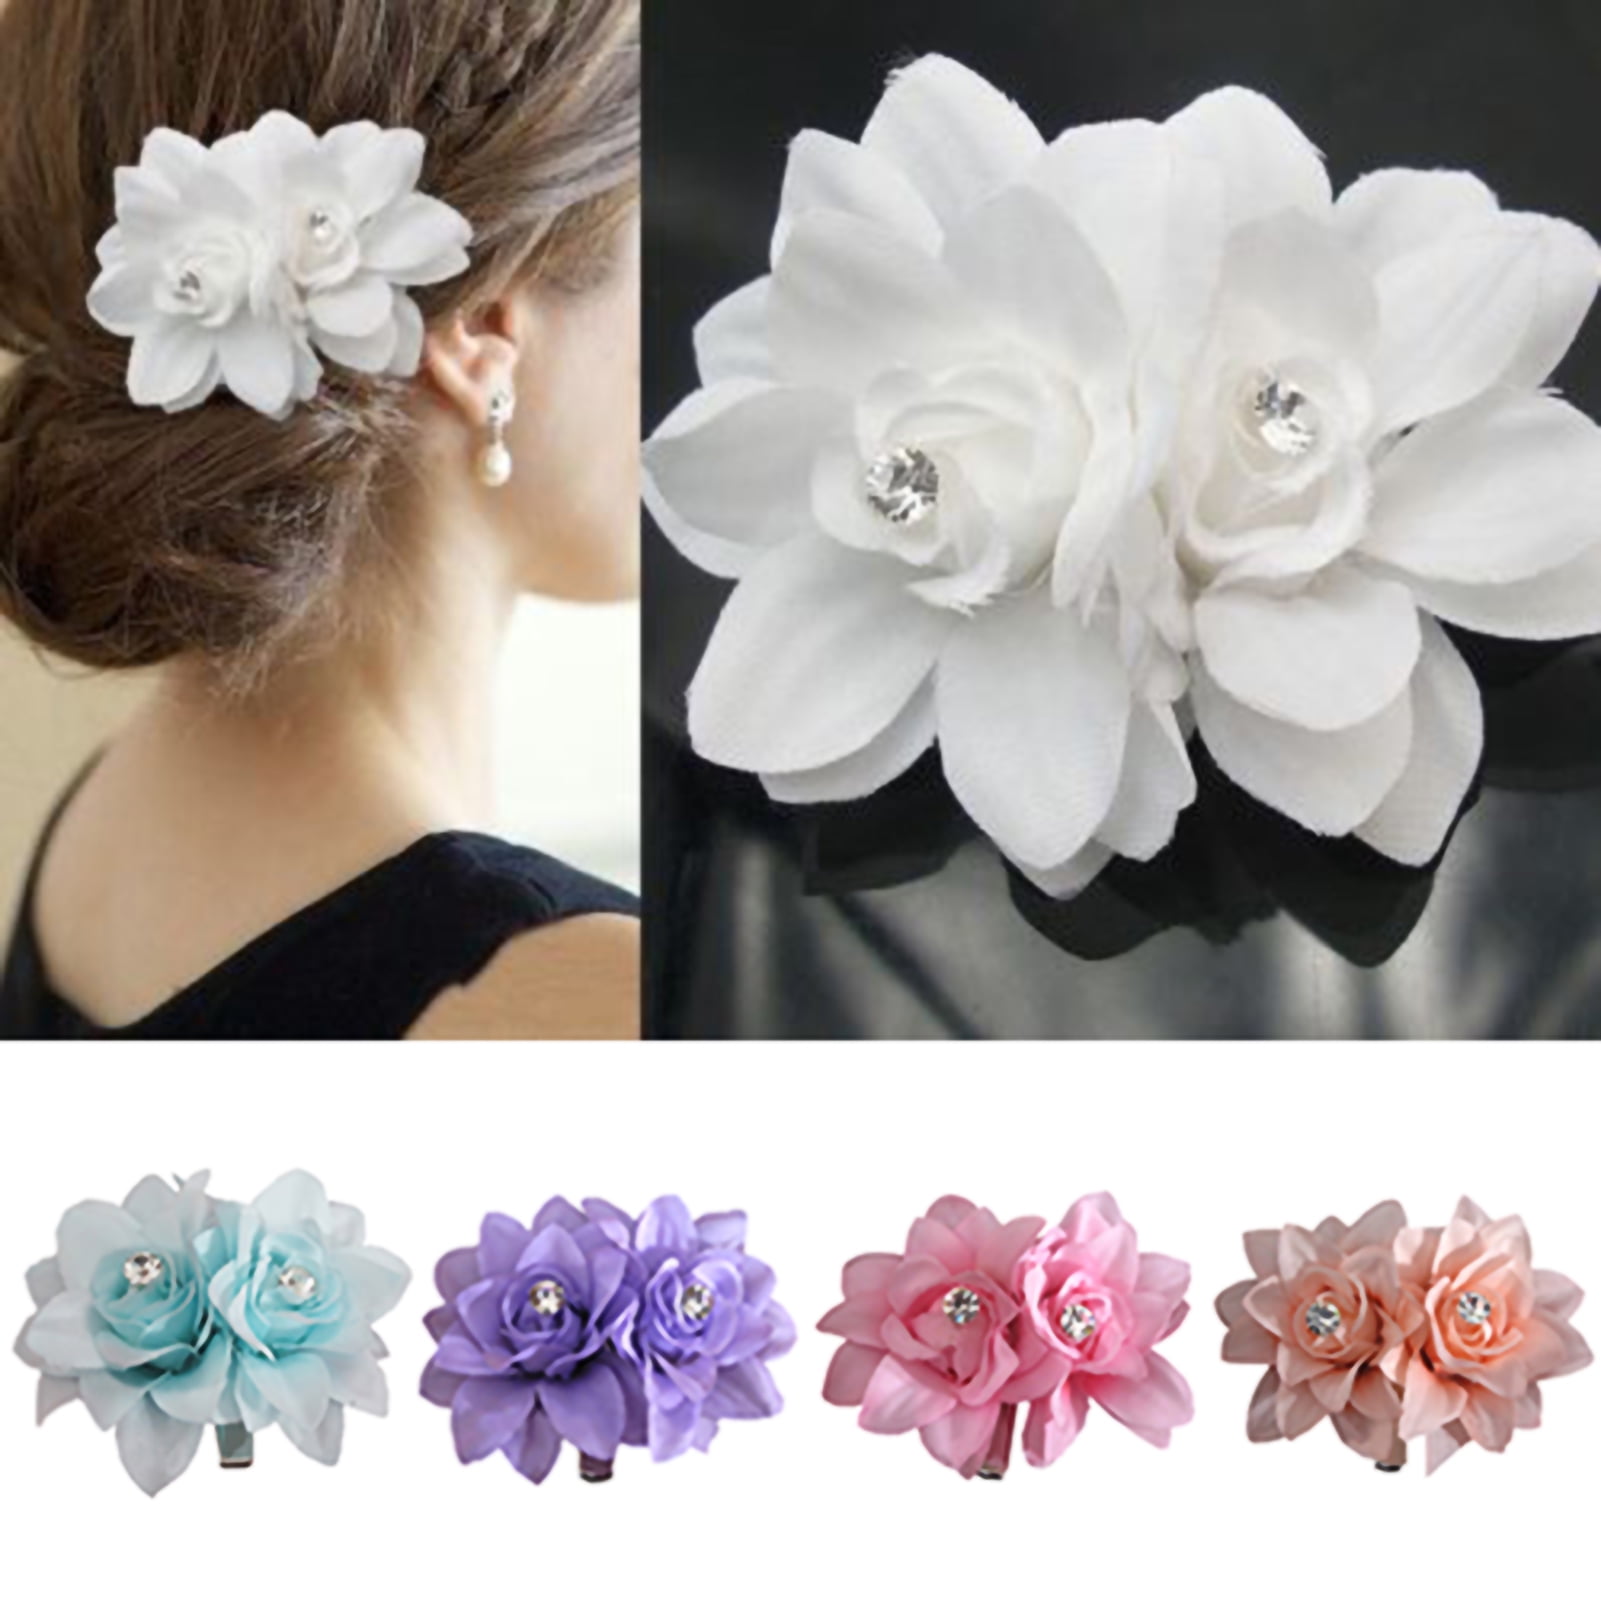 1X 18 Colors Women Chiffon Flowers Hair Clips Butterfly Orchid Alligator Clips 